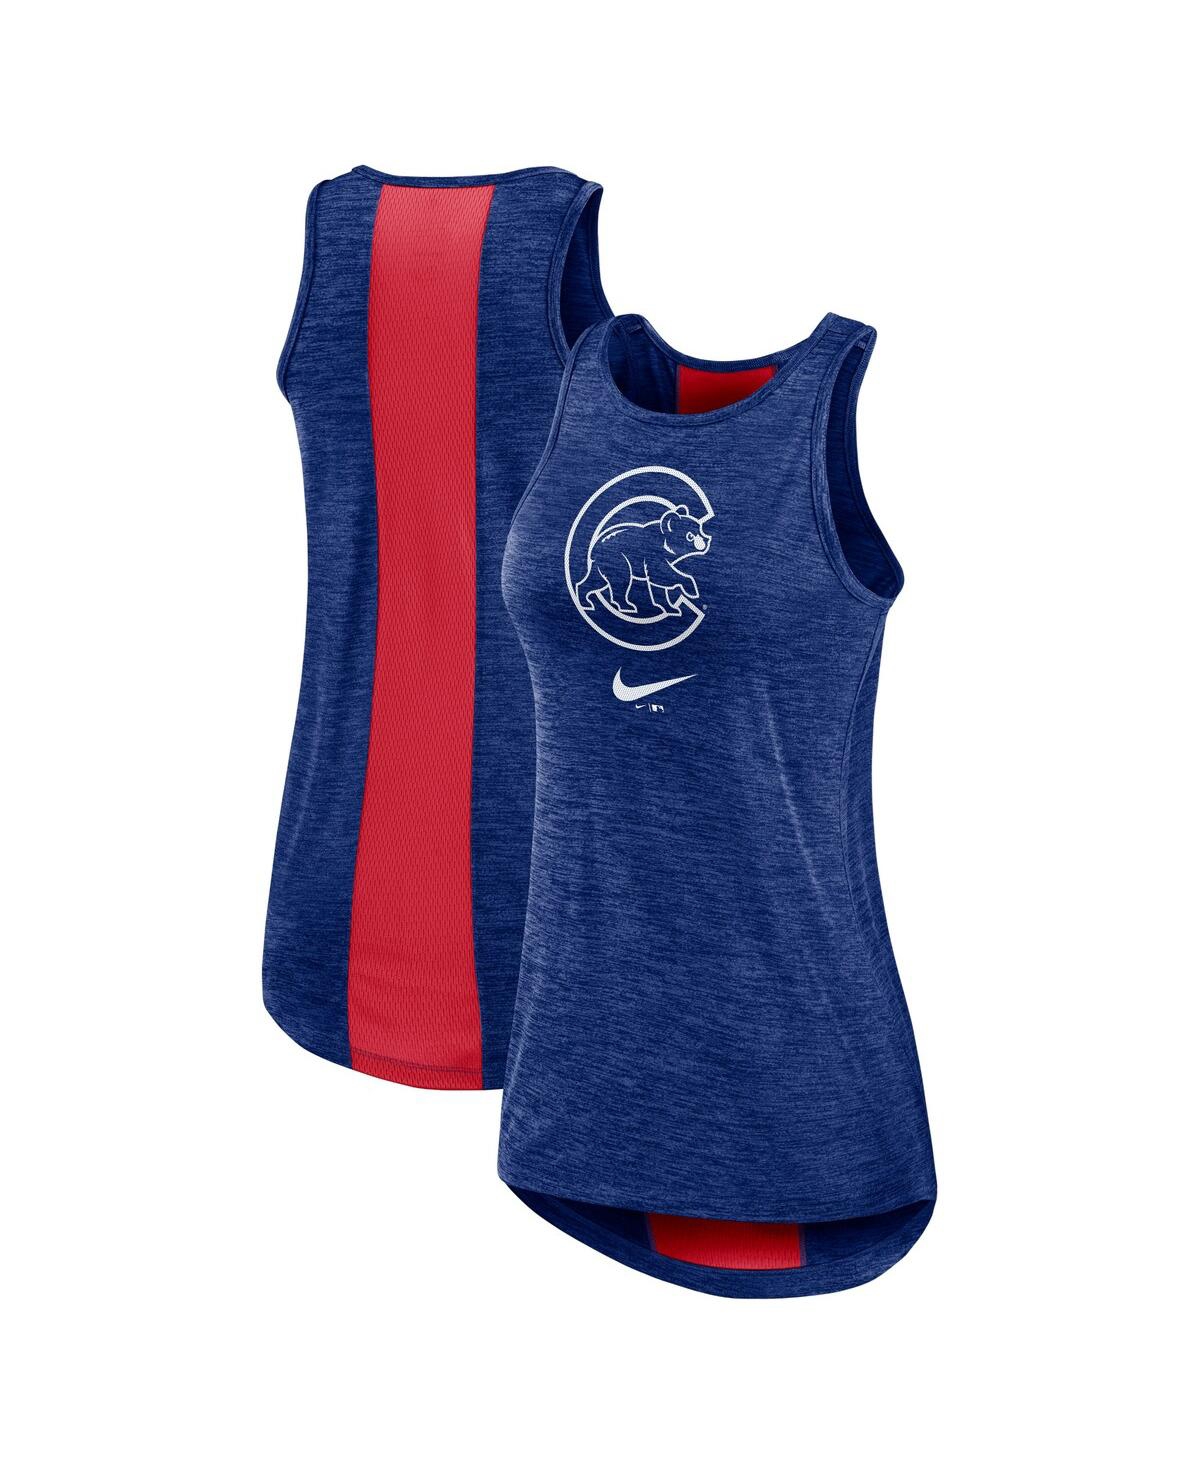 Women's Nike Royal Chicago Cubs Right Mix High Neck Tank Top - Royal